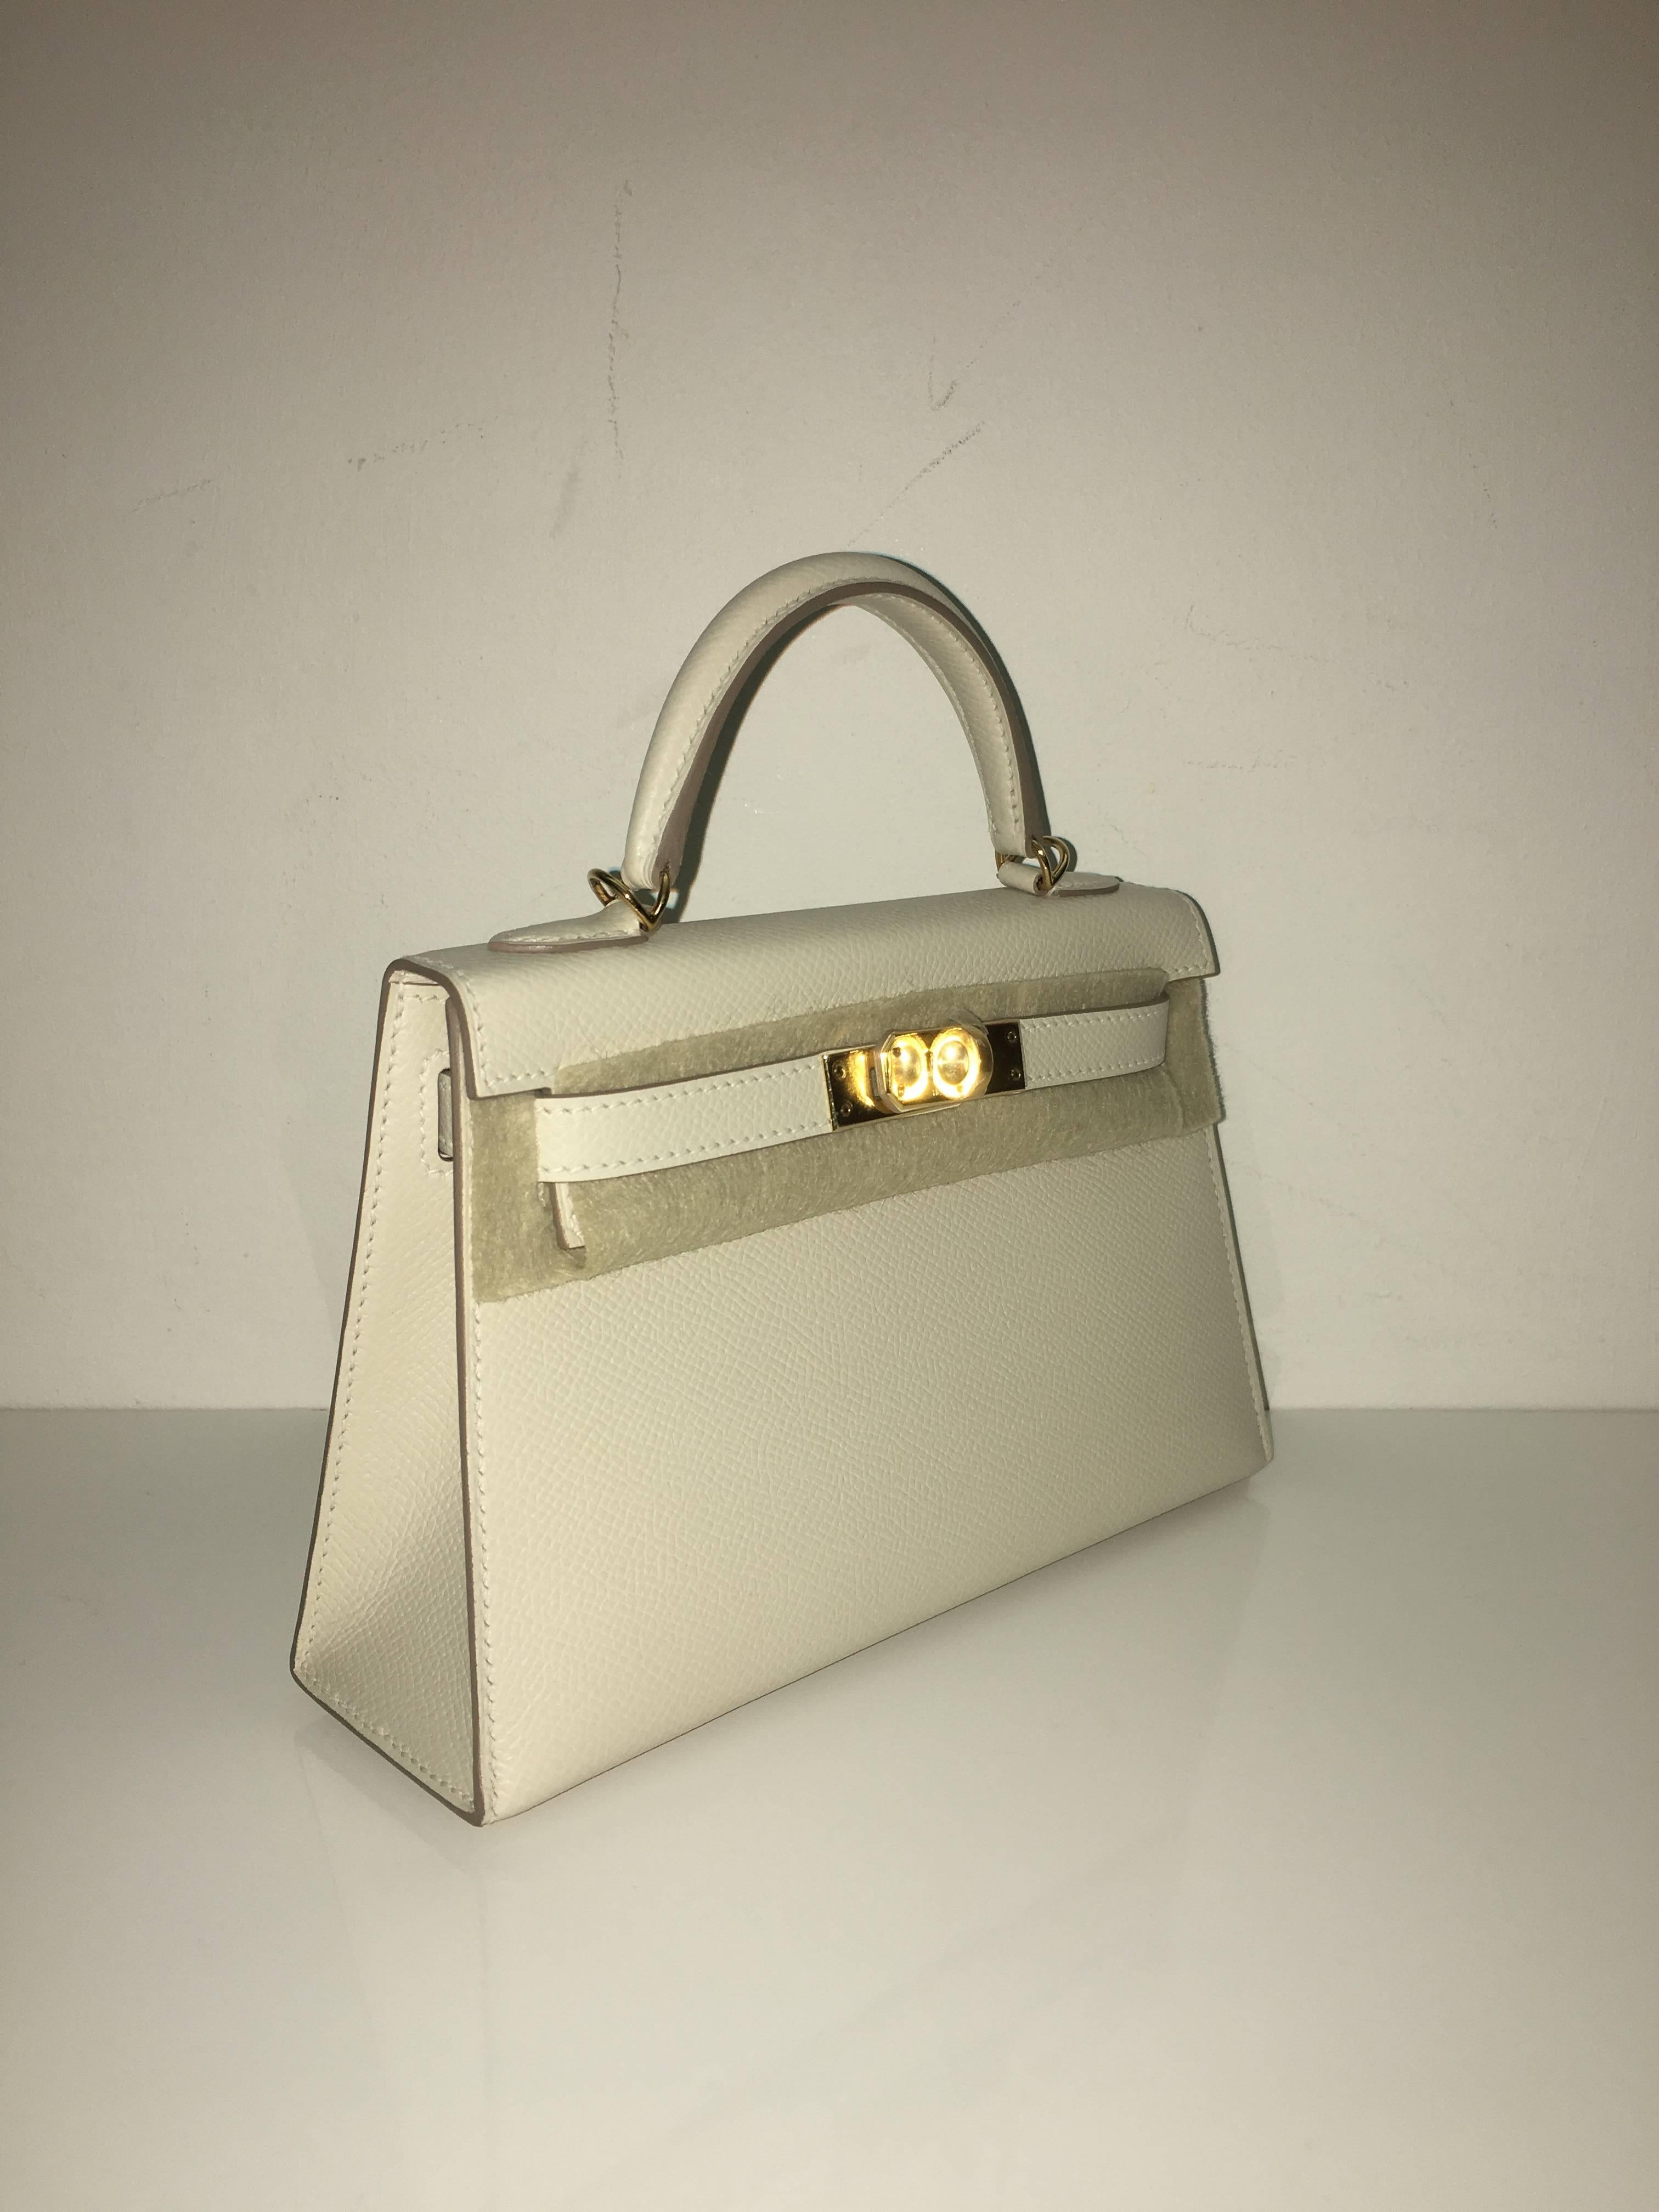 Hermes 
Kelly Size 20 (mini)
Epsom Leather 
Colour Craie
Gold Hardware 
store fresh, comes with receipt and full set (dust bag, box...) 
Hydeparkfashion specializes in sourcing and delivering authentic luxury handbags, mainly Hermes, to client